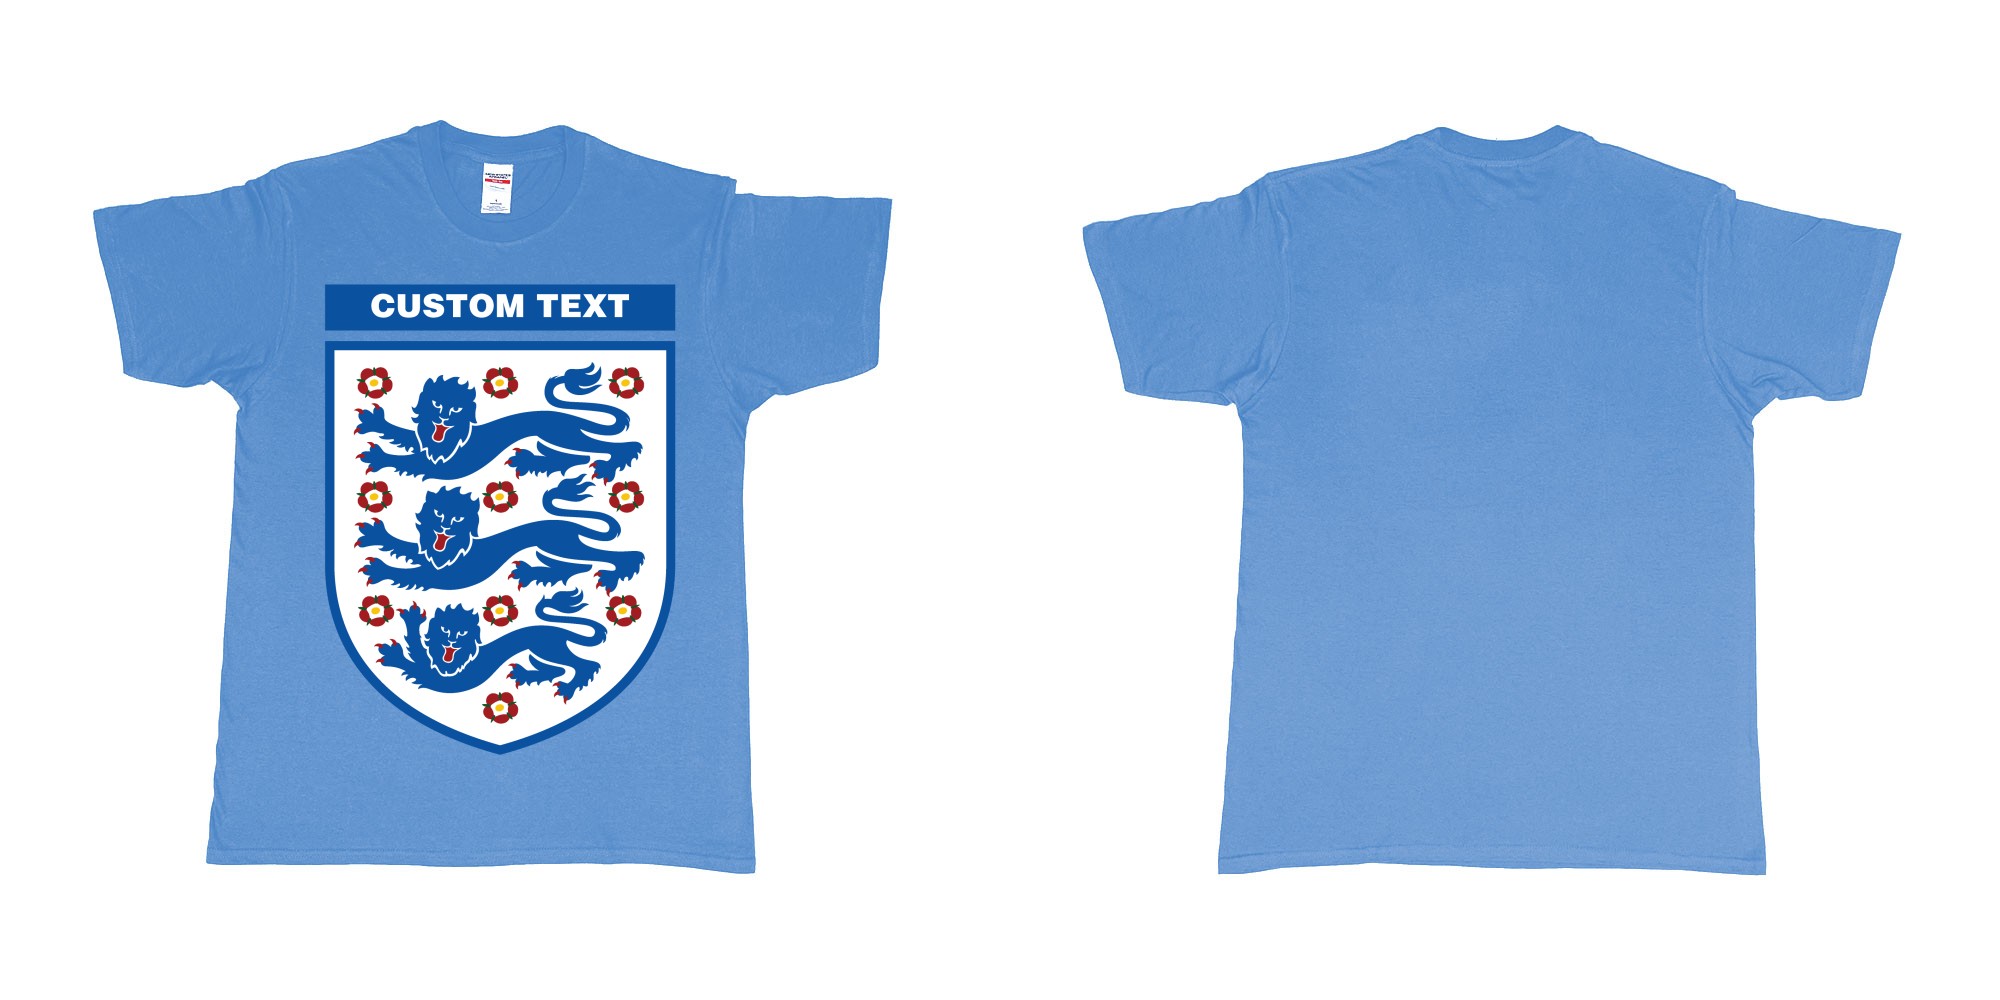 Custom tshirt design england national football team logo in fabric color carolina-blue choice your own text made in Bali by The Pirate Way